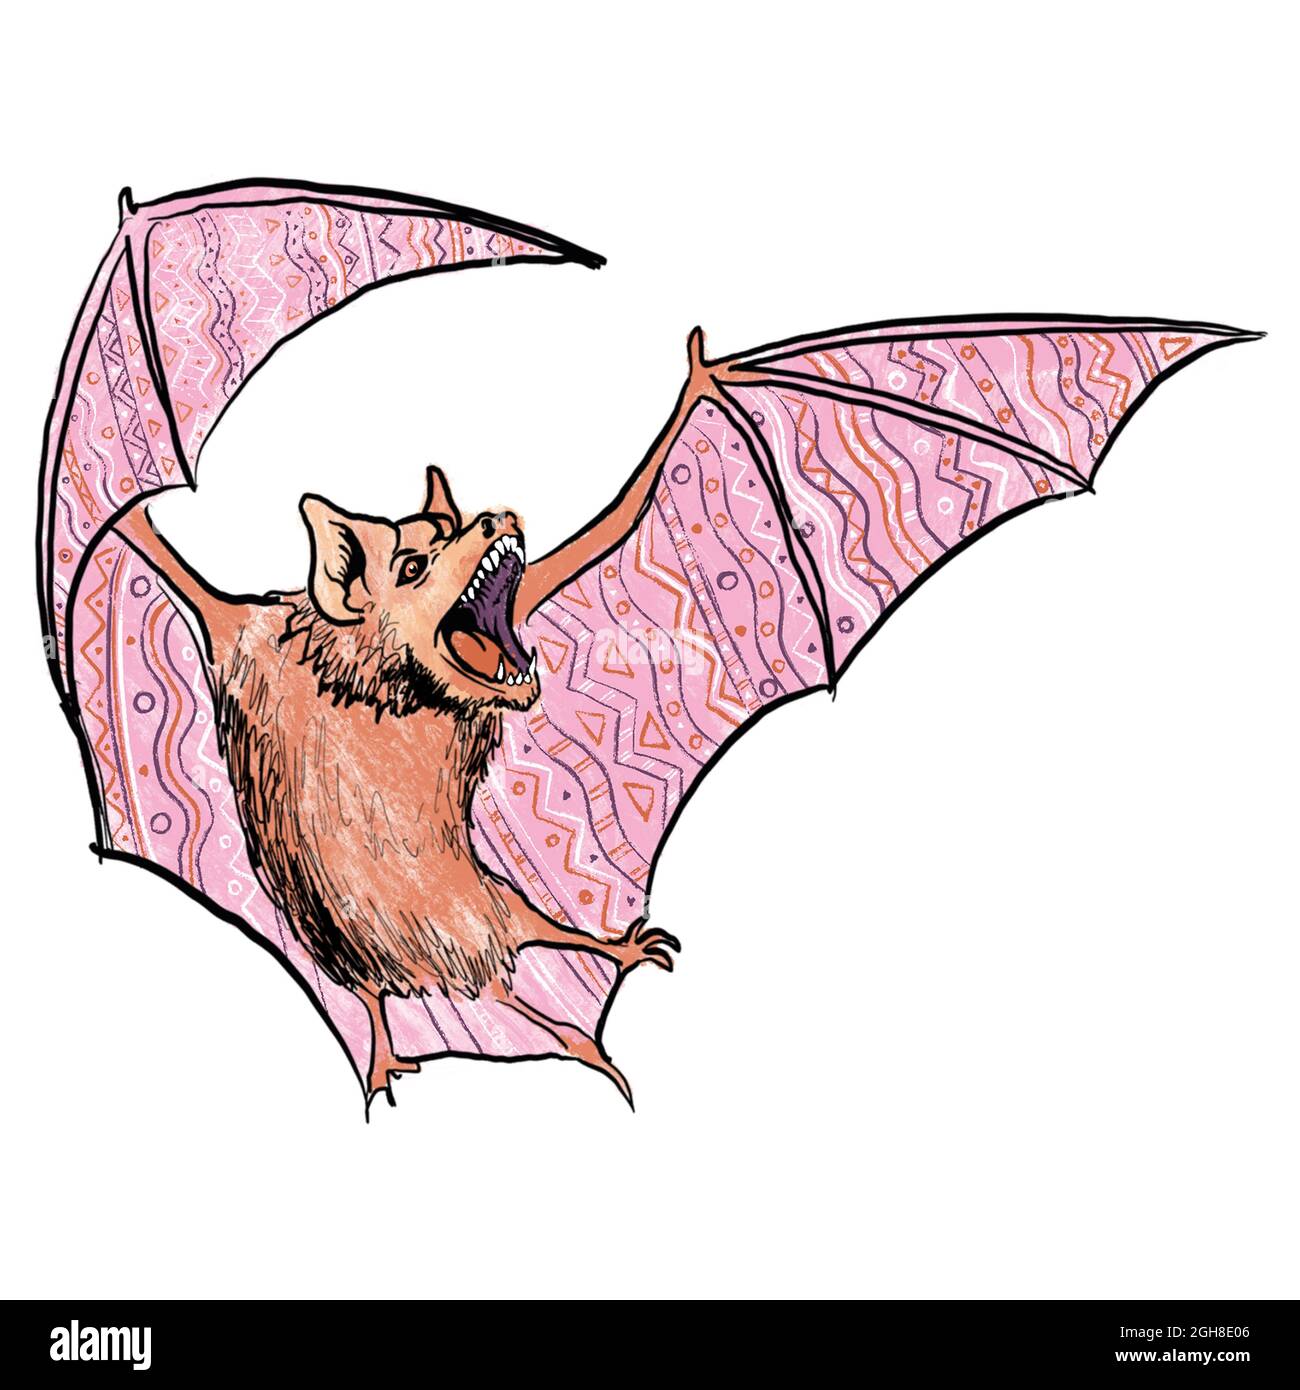 Bat drawing Animals Drawings Pictures Drawings ideas for kids Easy and  simple